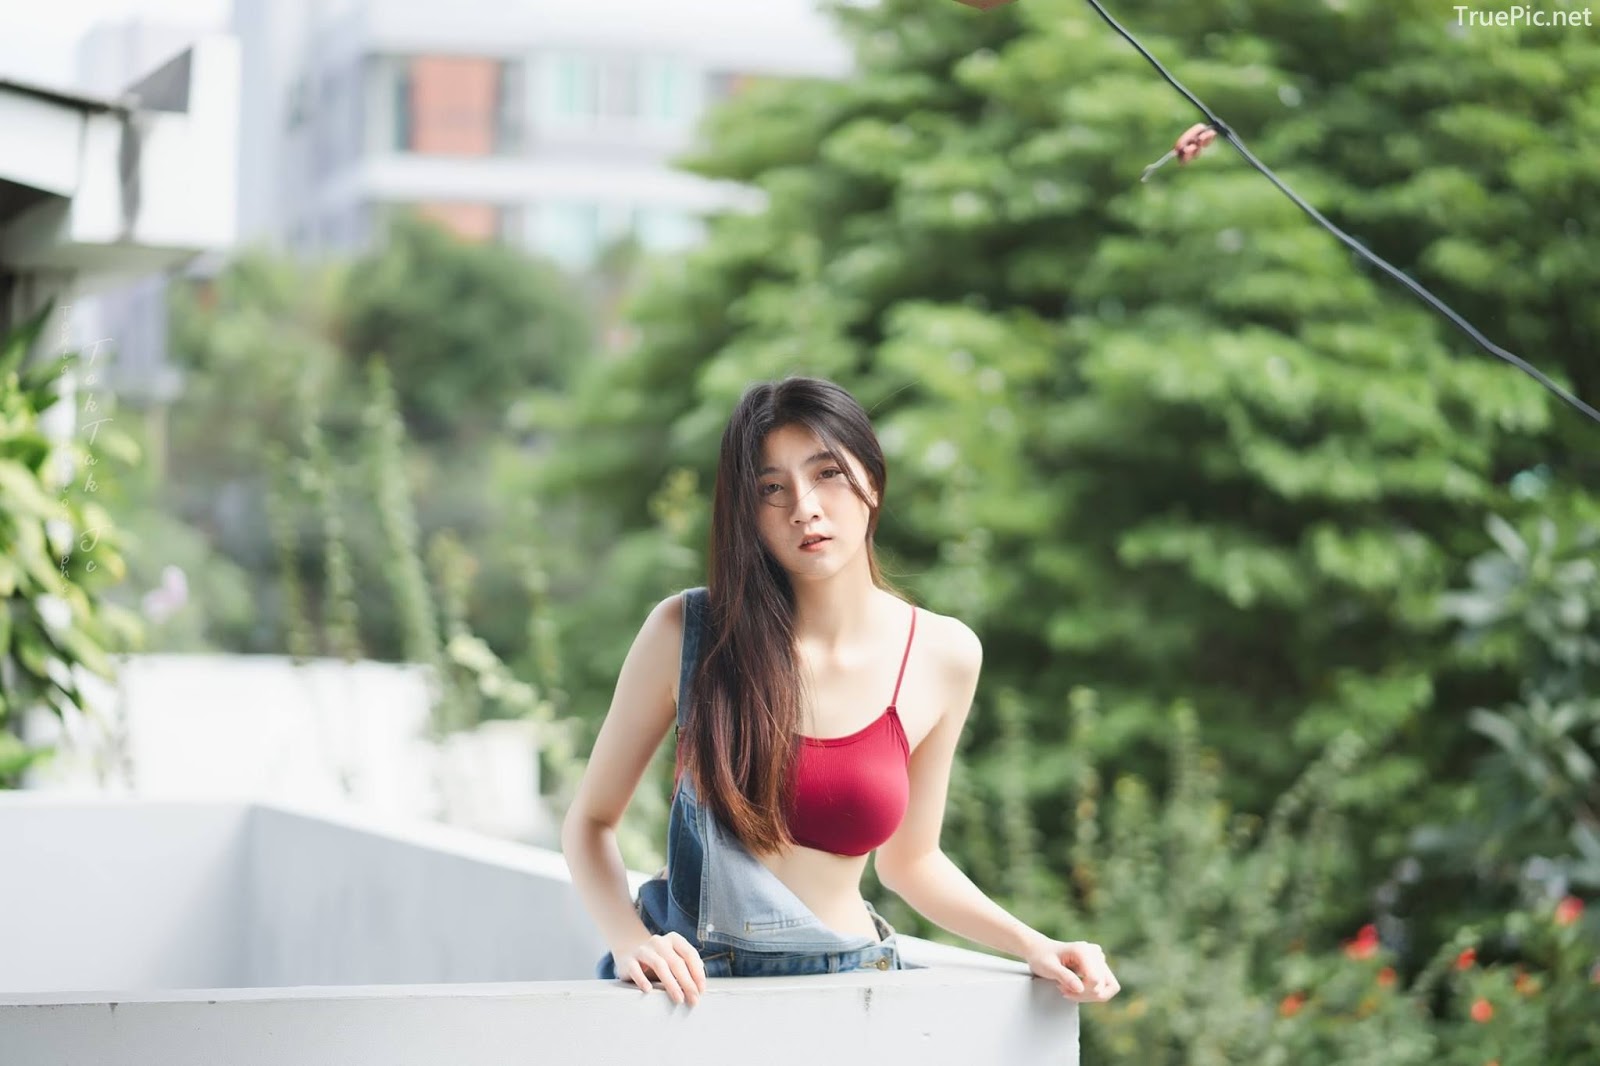 Thailand angel model Sasi Ngiunwan - Red plum bra and jean on a beautiful day - Picture 18